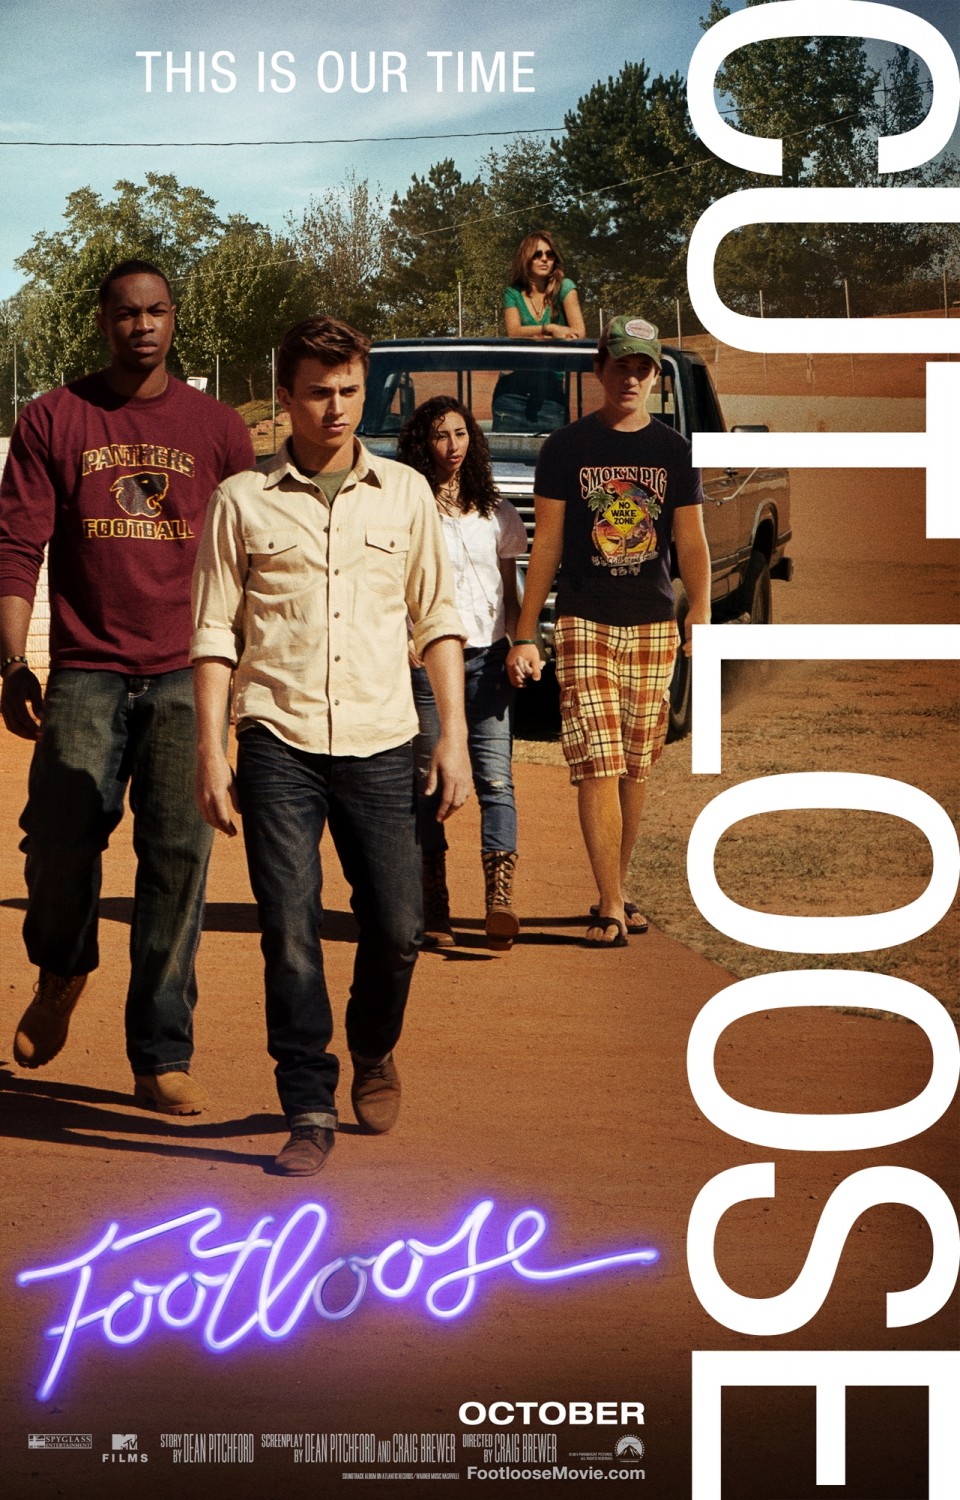 Extra Large Movie Poster Image for Footloose (#4 of 6)